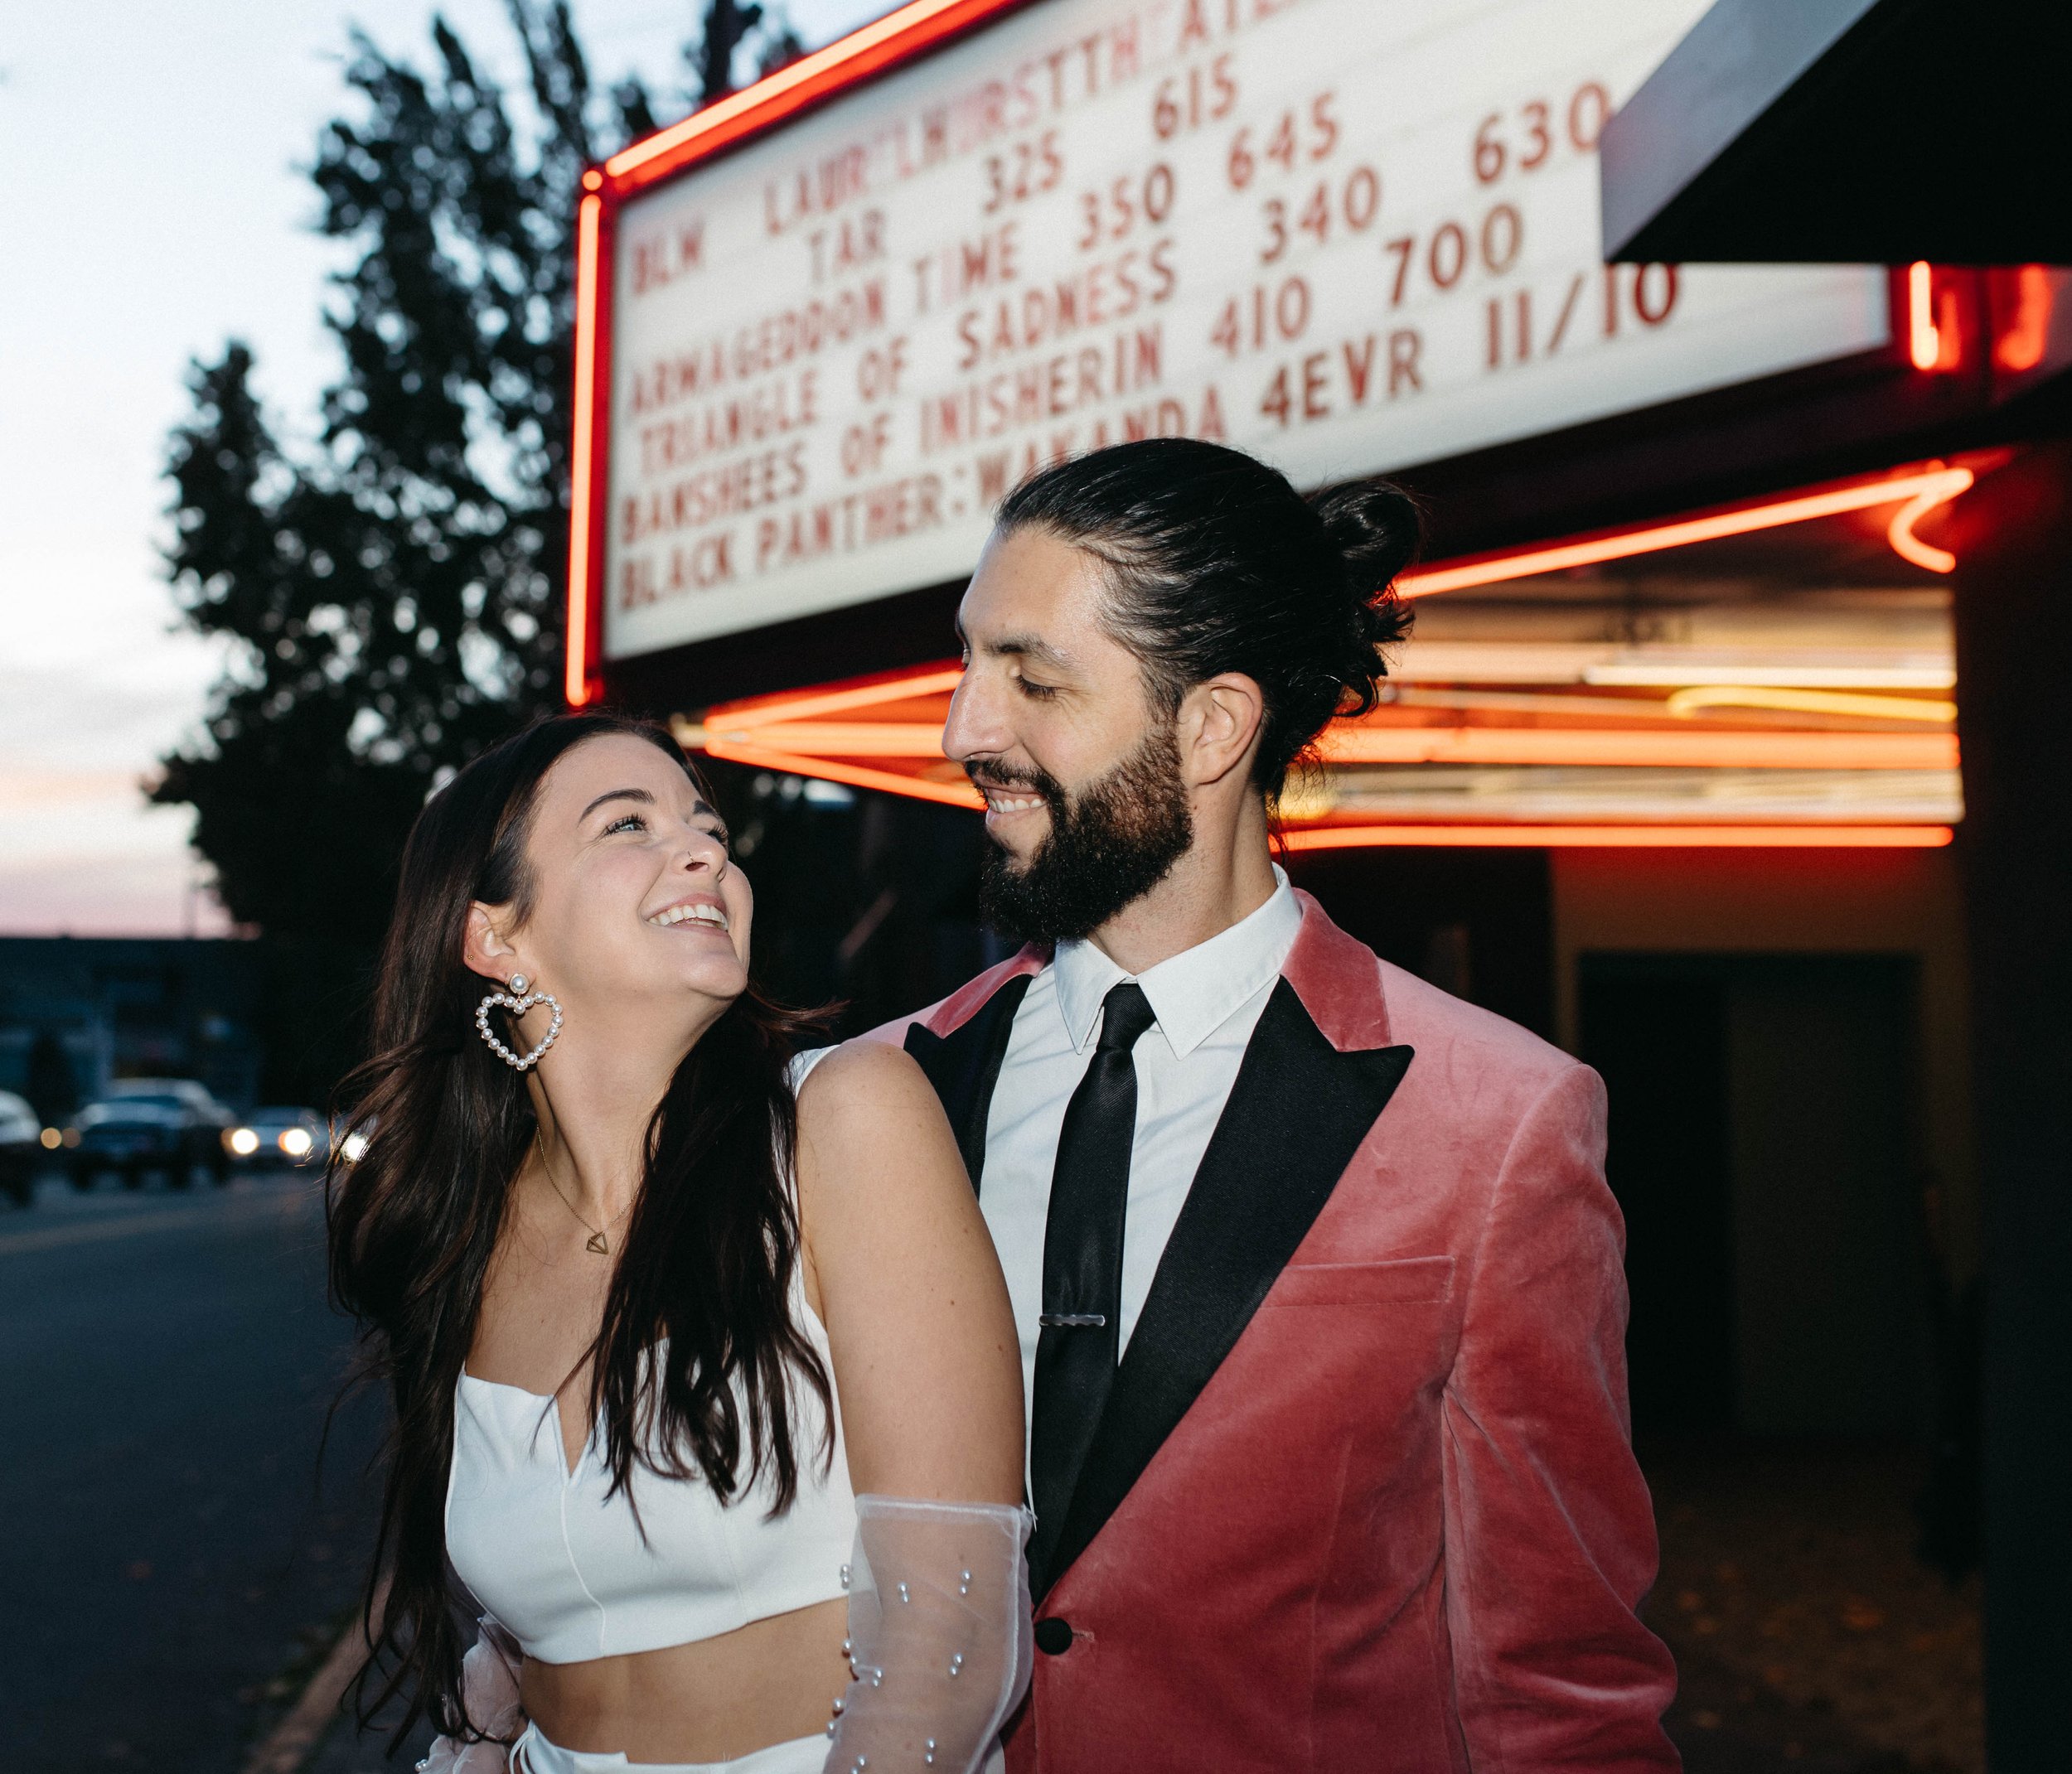  funky, modern, engagement photoshoot, neon signs, fun earrings, the unique couple poses, vegas inspired elopement nasty gal two-piece set, colorful suit, pearl gloves, movie theater 